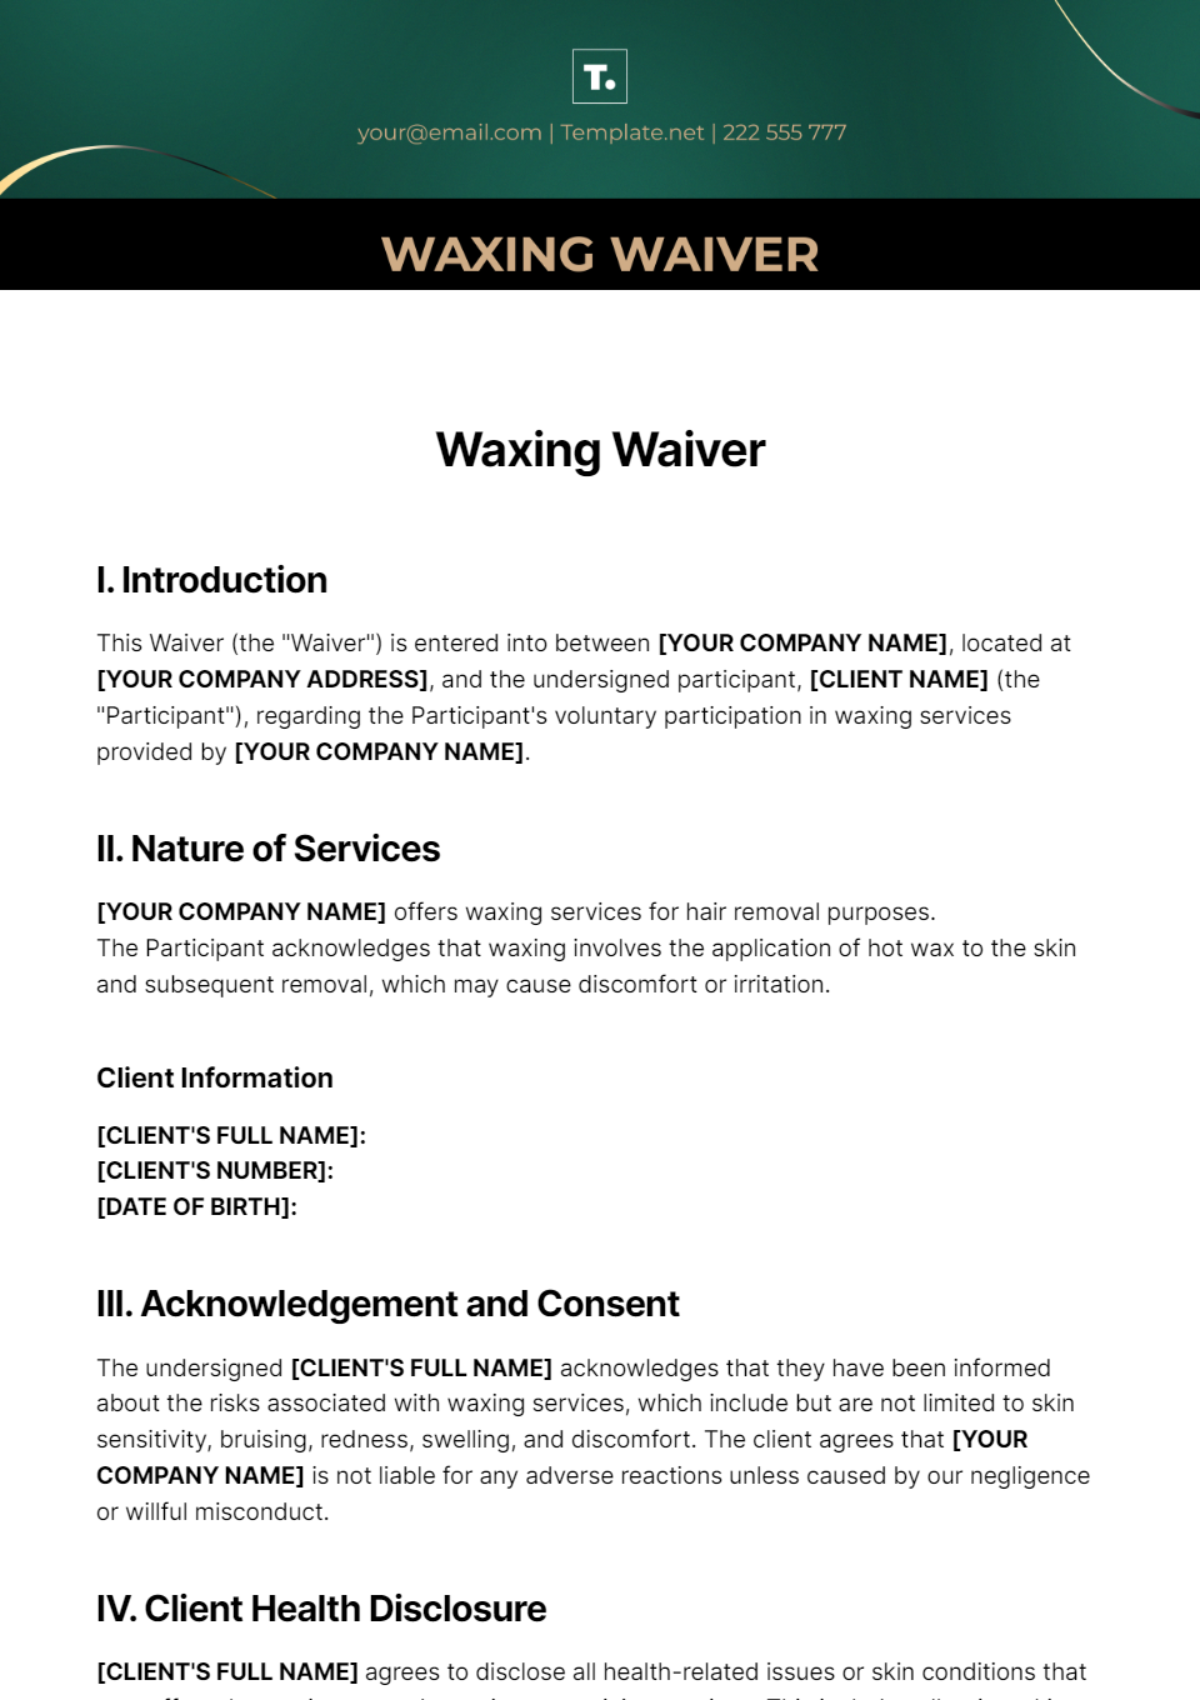 Waxing Waiver Template